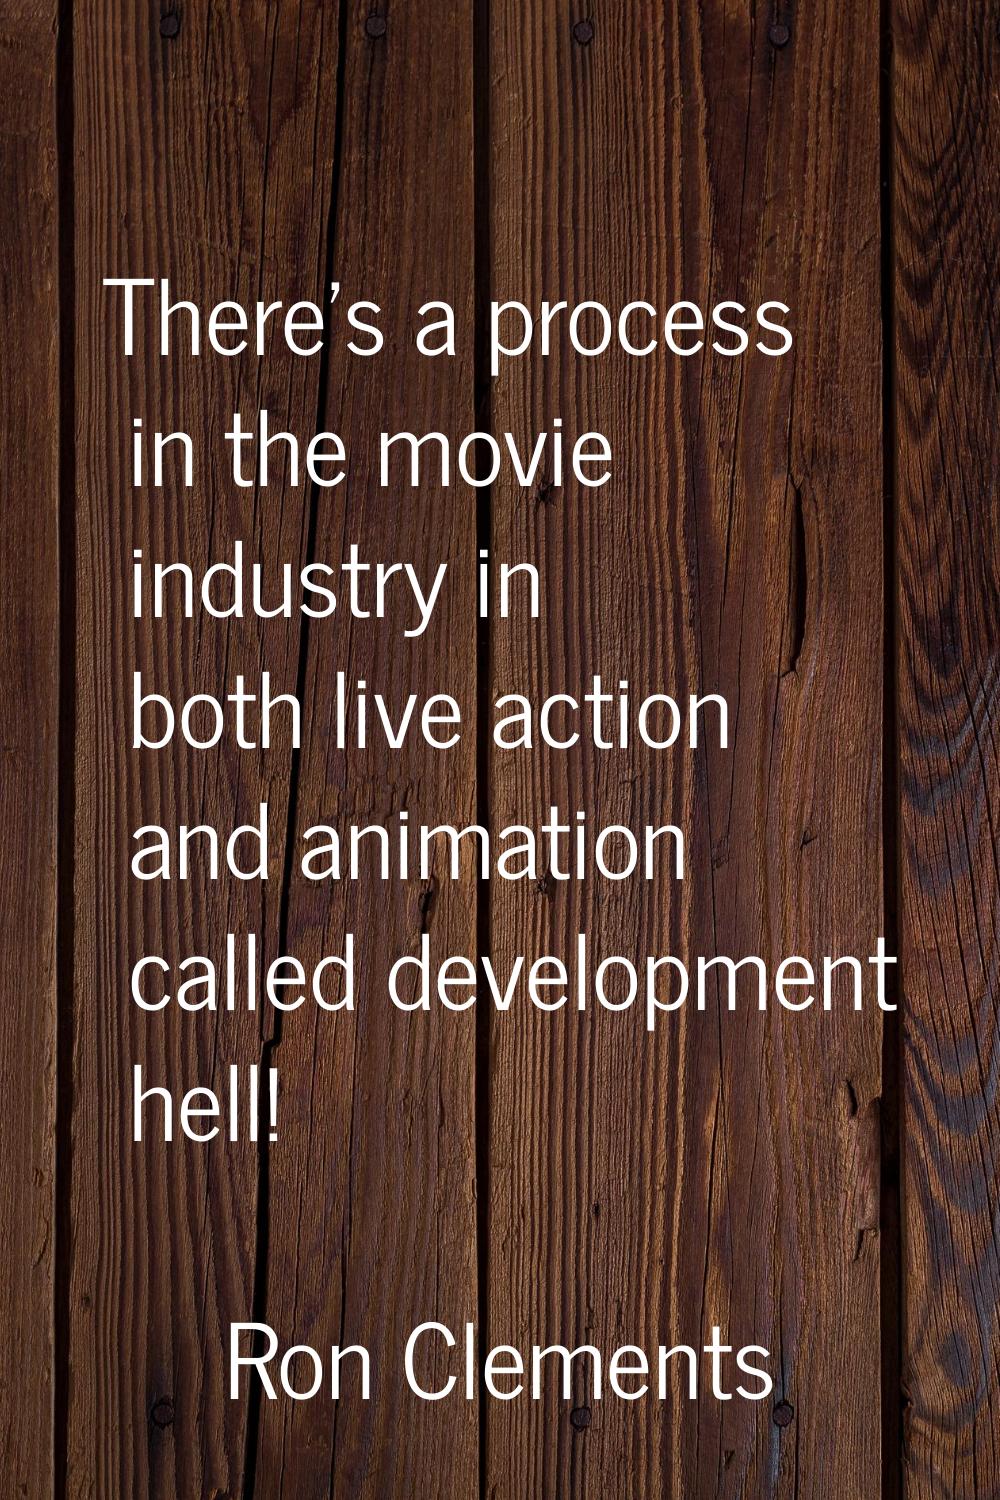 There's a process in the movie industry in both live action and animation called development hell!